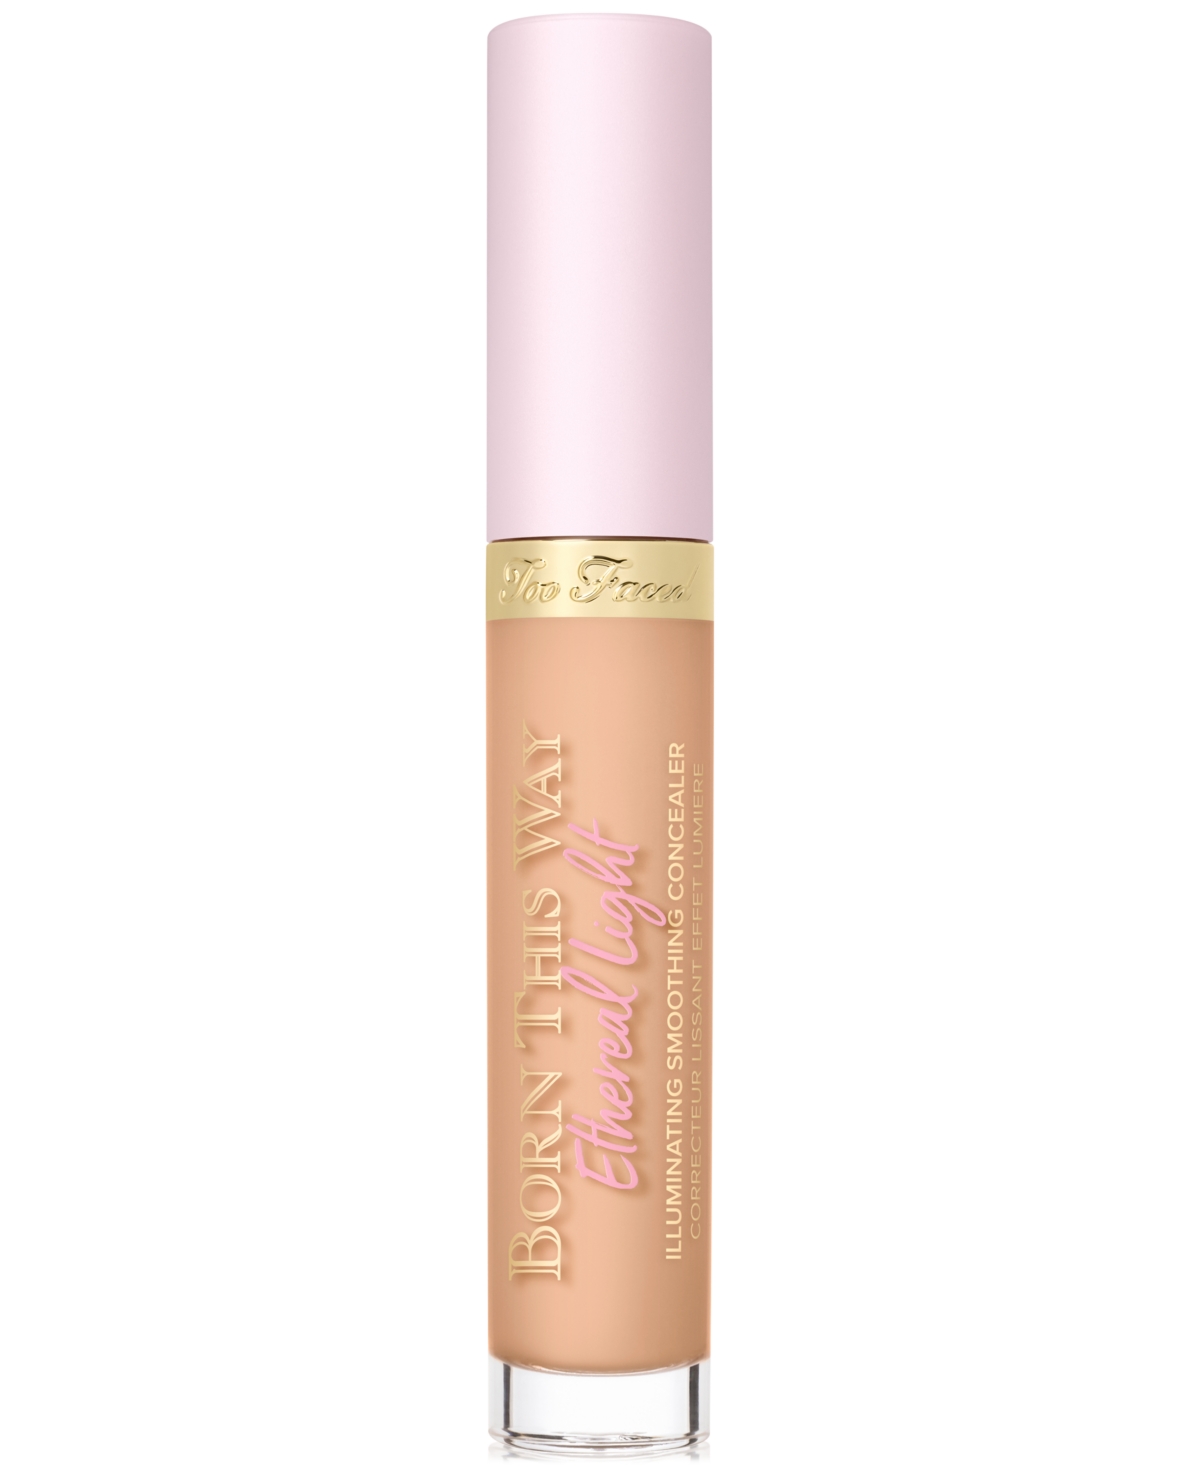 Too Faced Born This Way Ethereal Light Illuminating Smoothing Concealer In Caf Au Lait - Medium With Rosy Undertone